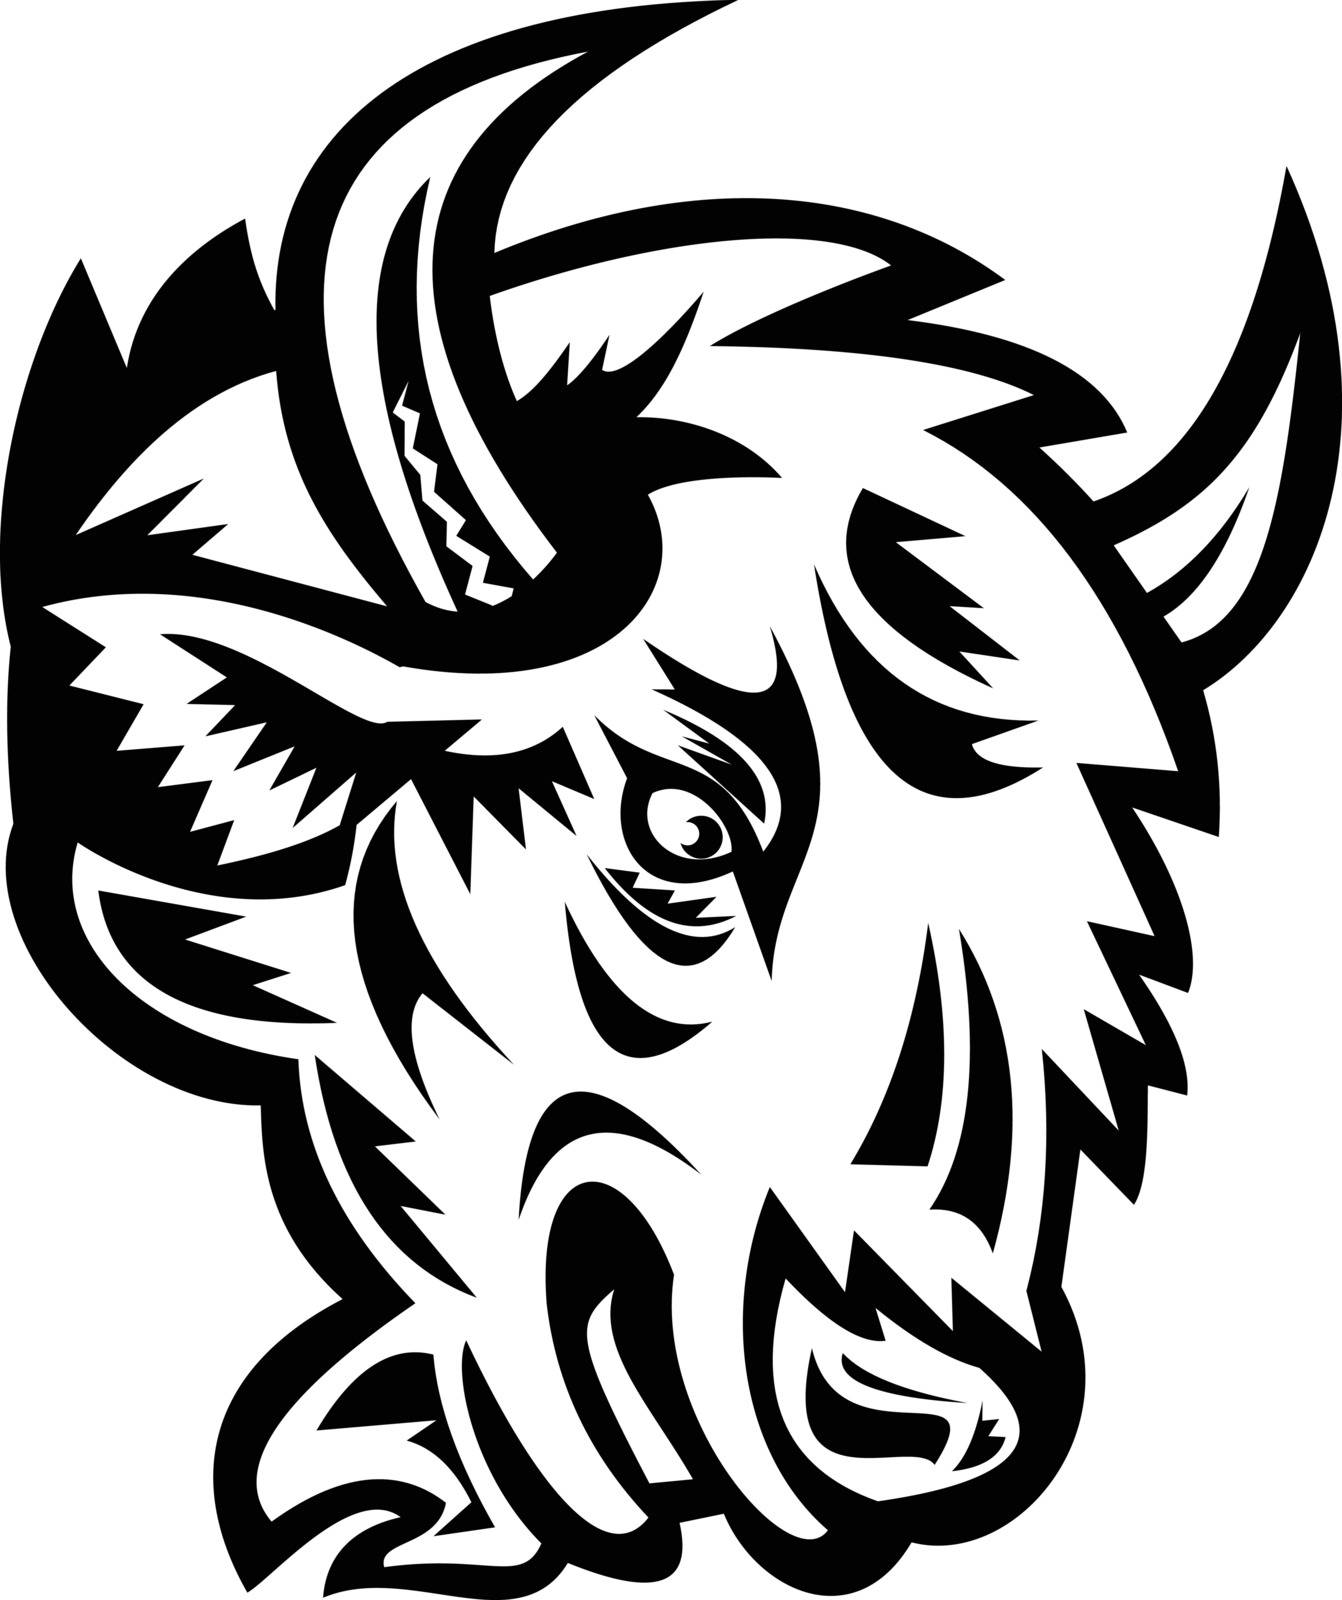 Head of an Angry North American Bison or American Buffalo Mascot Black and White by patrimonio